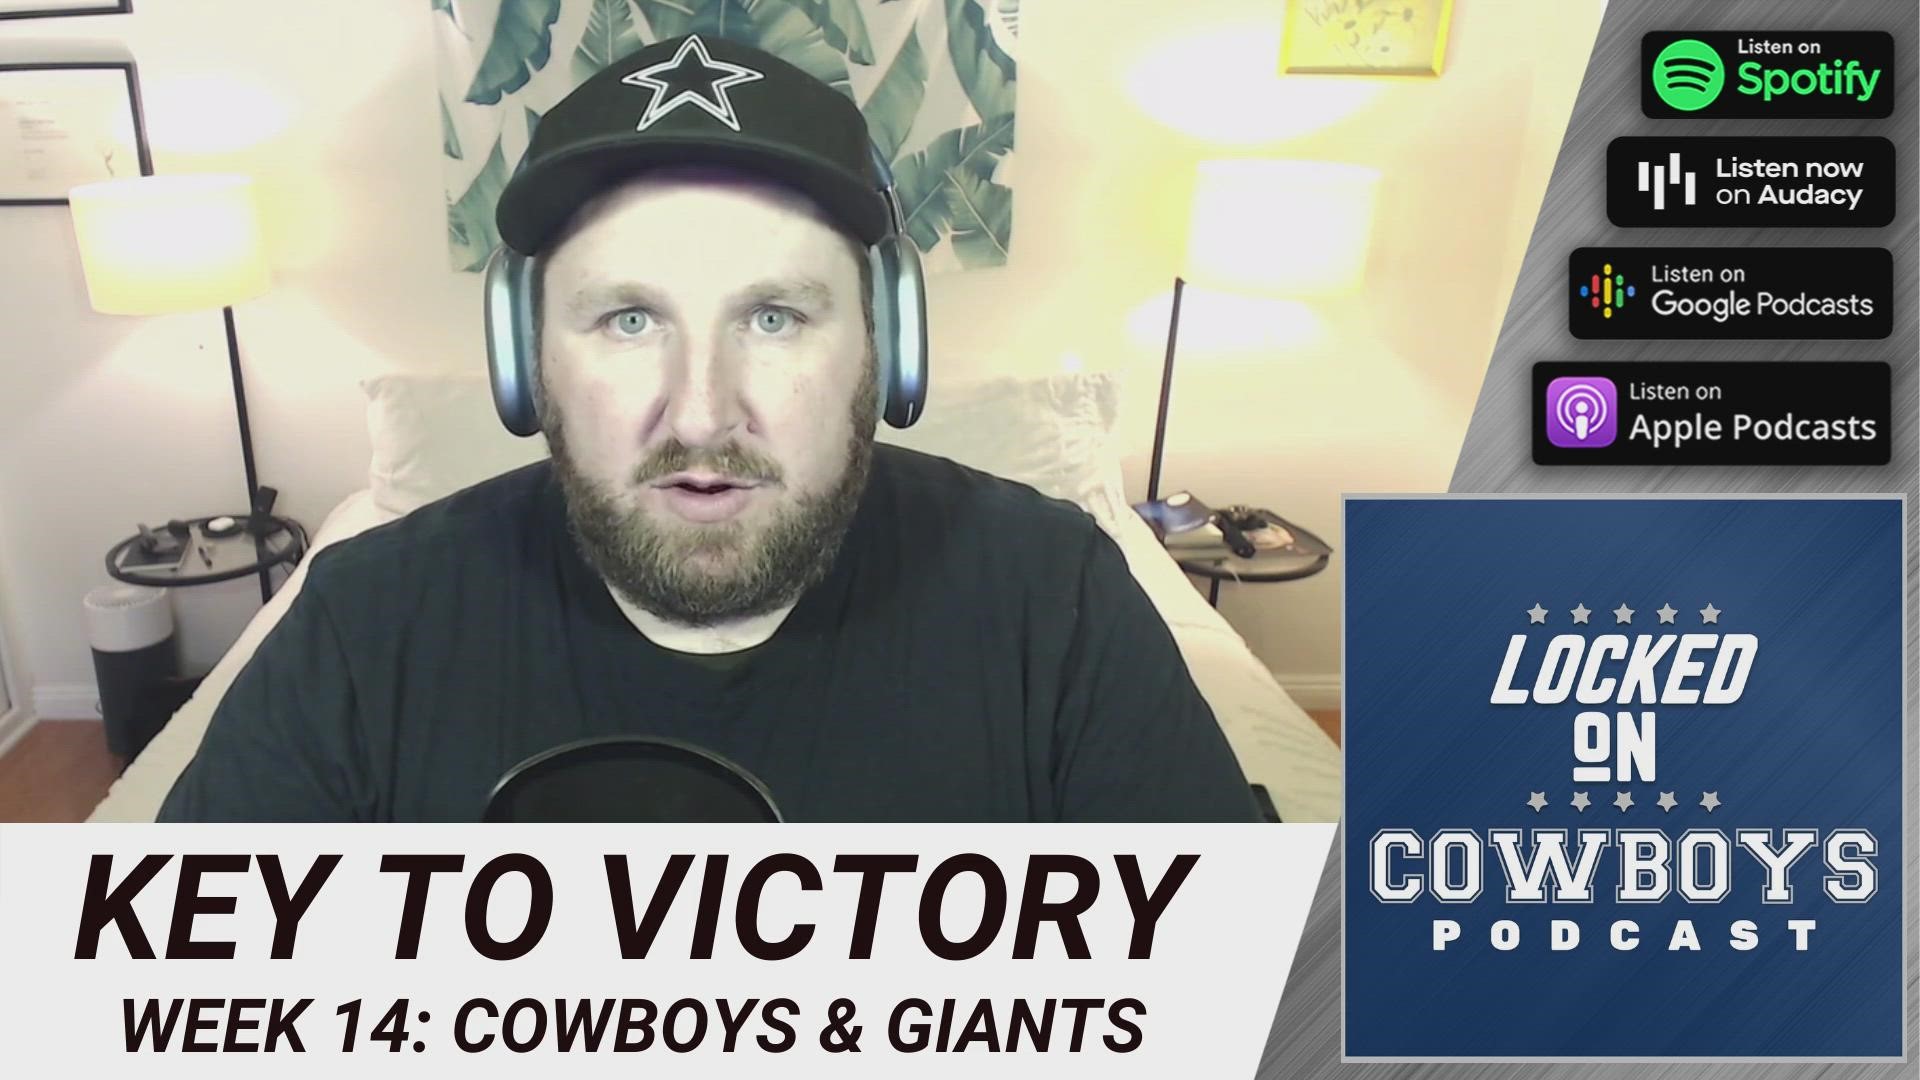 The key to victory for the Cowboys is simple this week. Stay focused. @McCoolBCB has that and more on Locked On Cowboys.